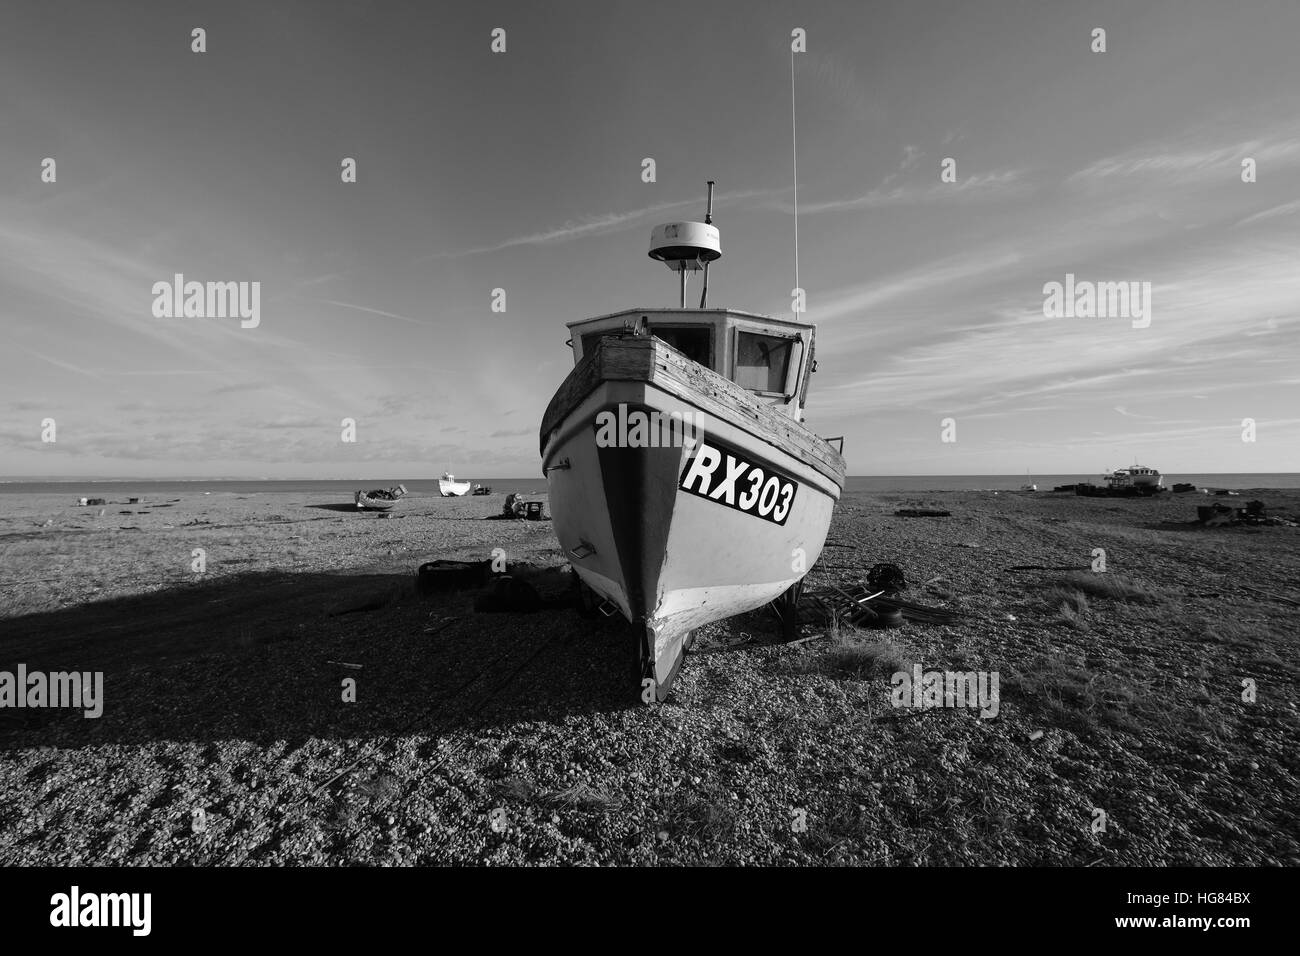 Fishing Boat RX300 Dungeness Stock Photo